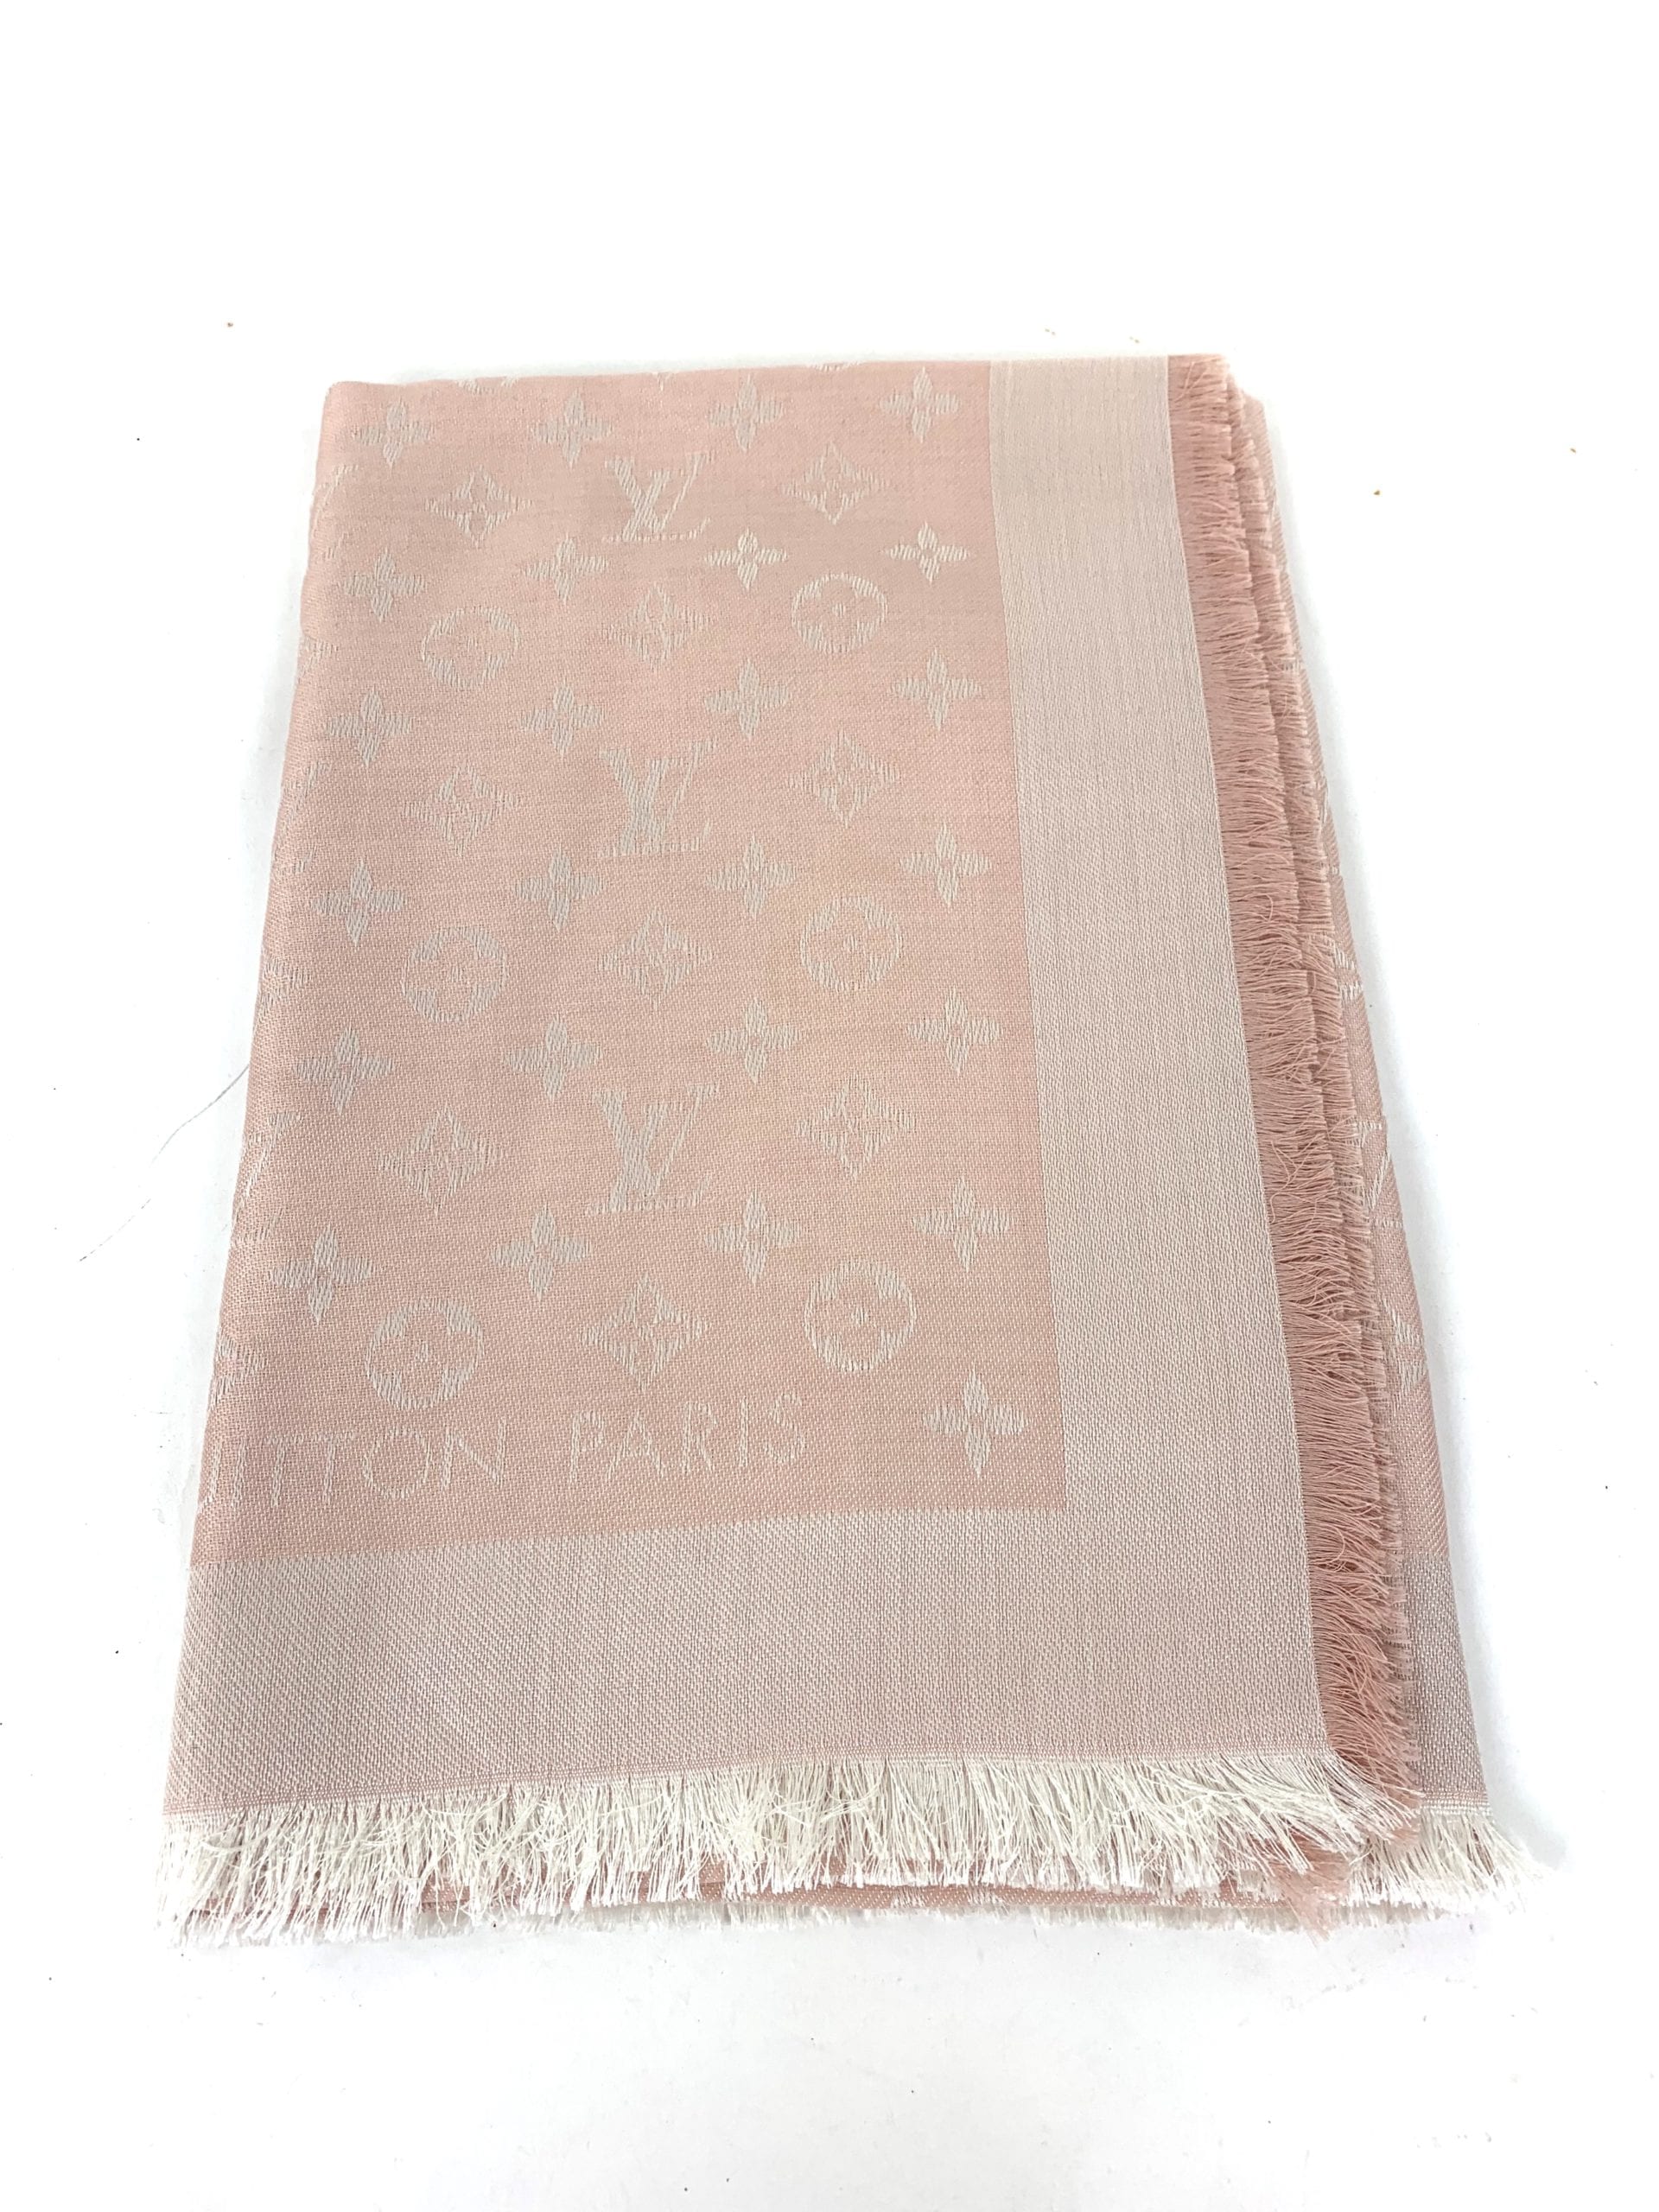 Louis Vuitton Monogram Denim Wool Scarf - Pink Scarves and Shawls,  Accessories - LOU780256